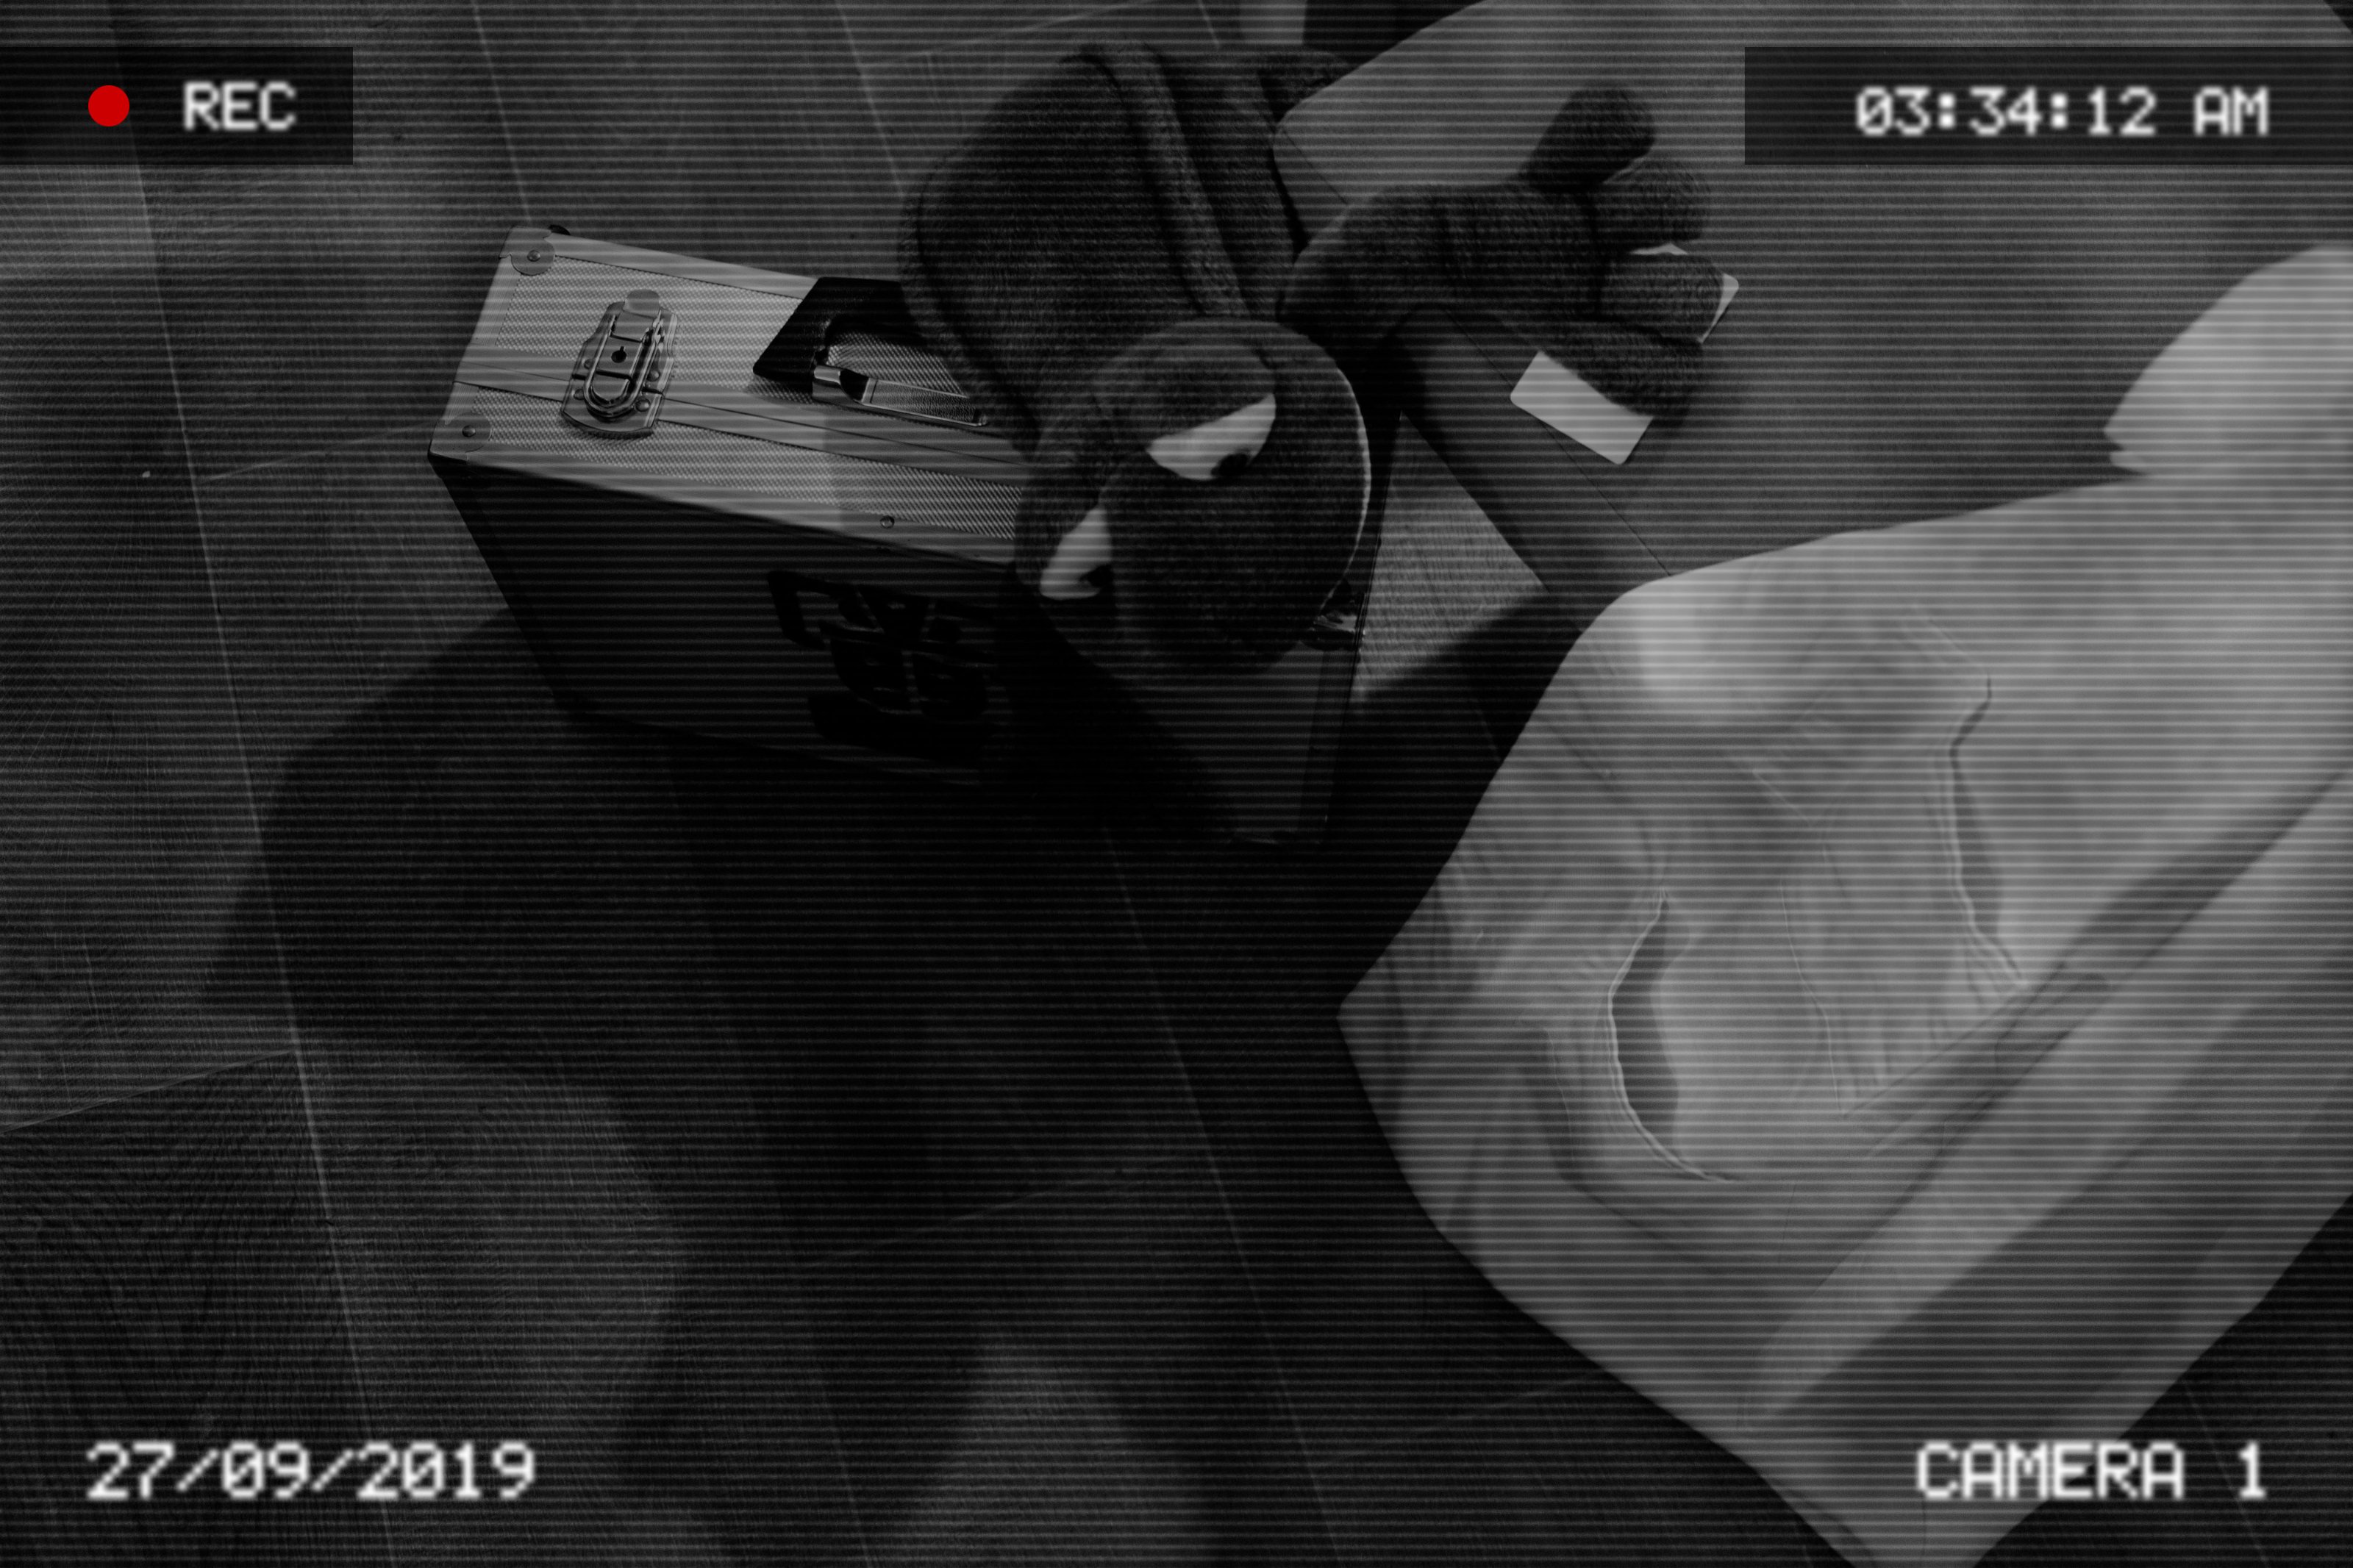 CCTV shows a plushy frog leaning over the case while holding a security access card